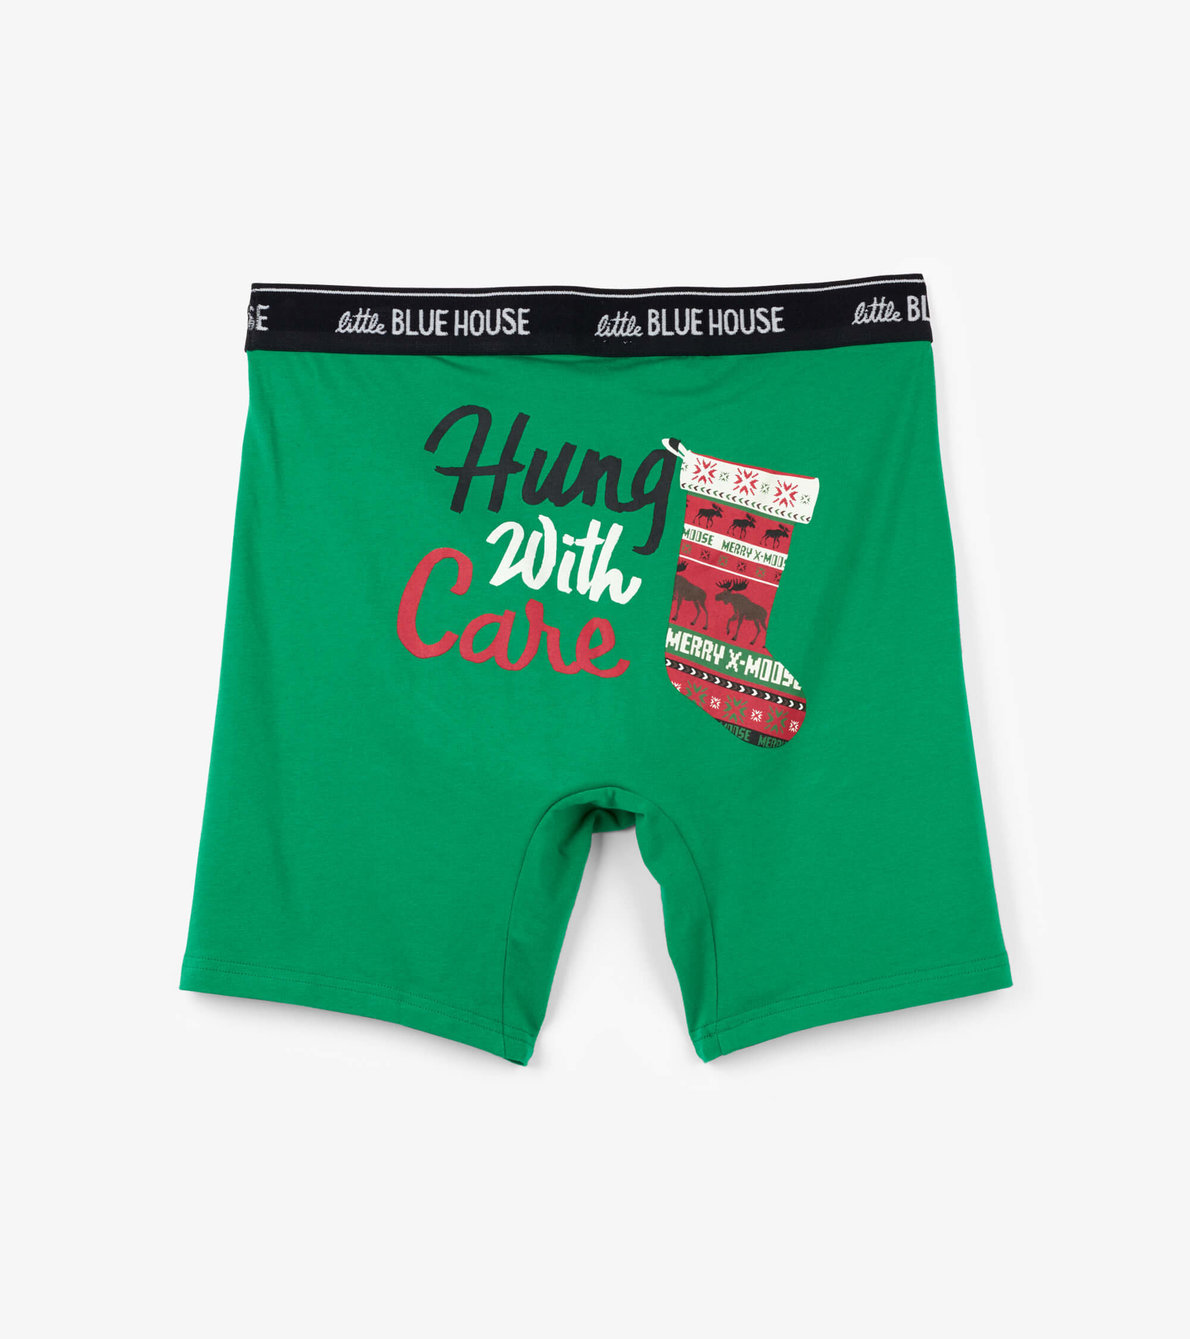 View larger image of Men's Hung with Care Boxers